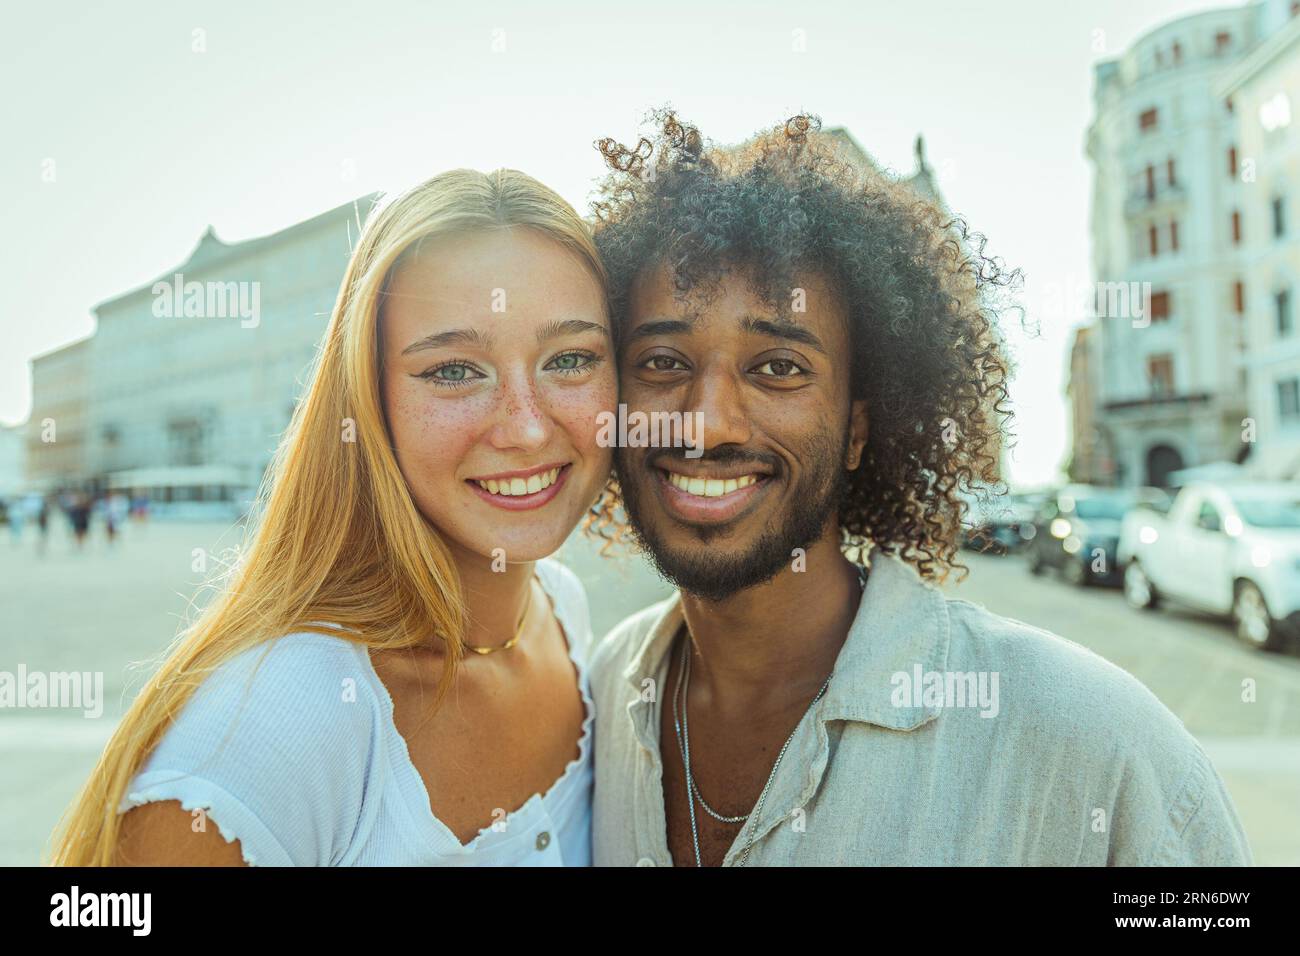 Portrait of two young adults of different ethnic backgrounds smiling in the summer in the city Stock Photo